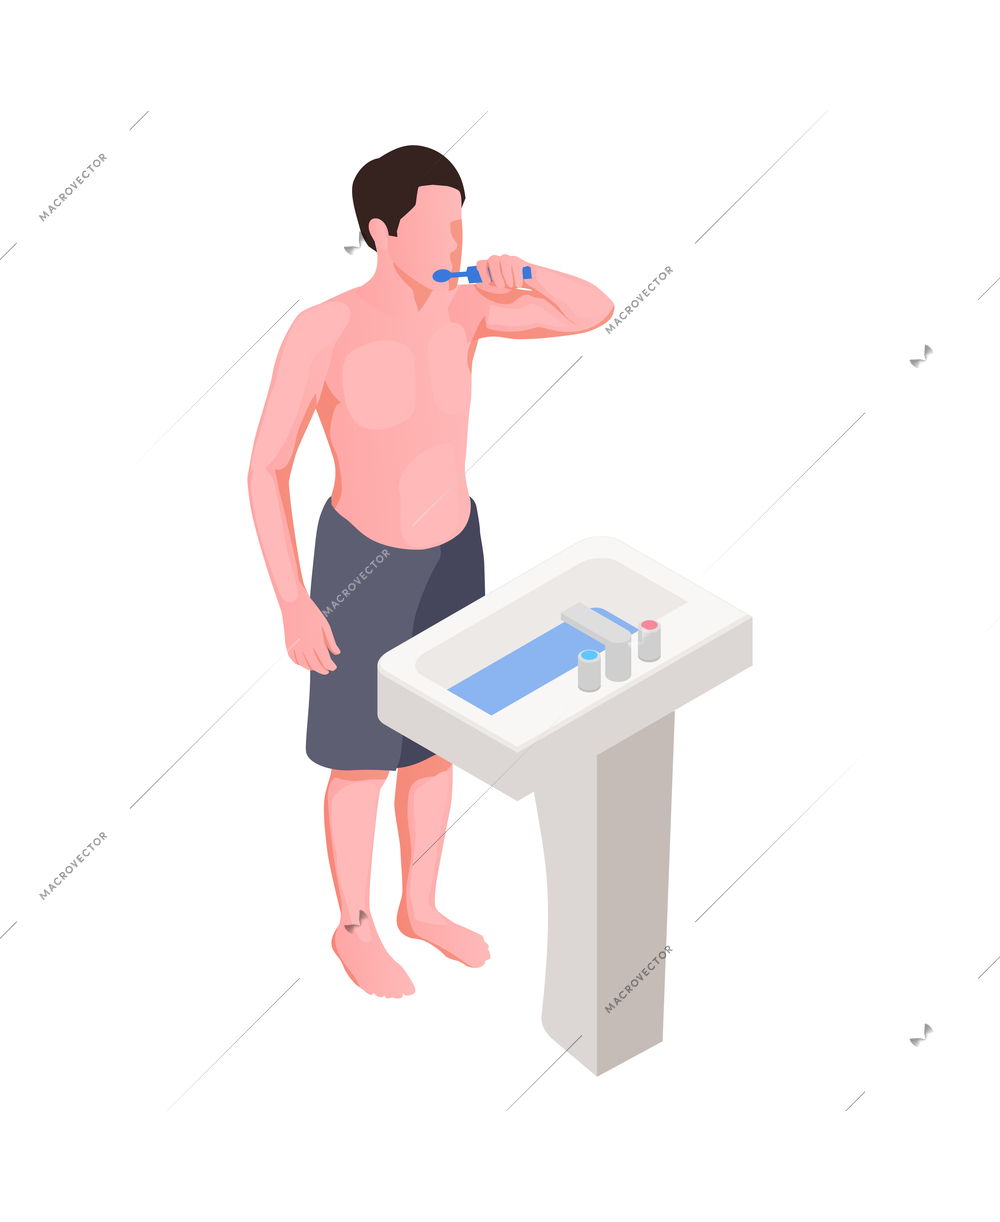 Hygiene isometric icon with man cleaning teeth in bathroom 3d vector illustration